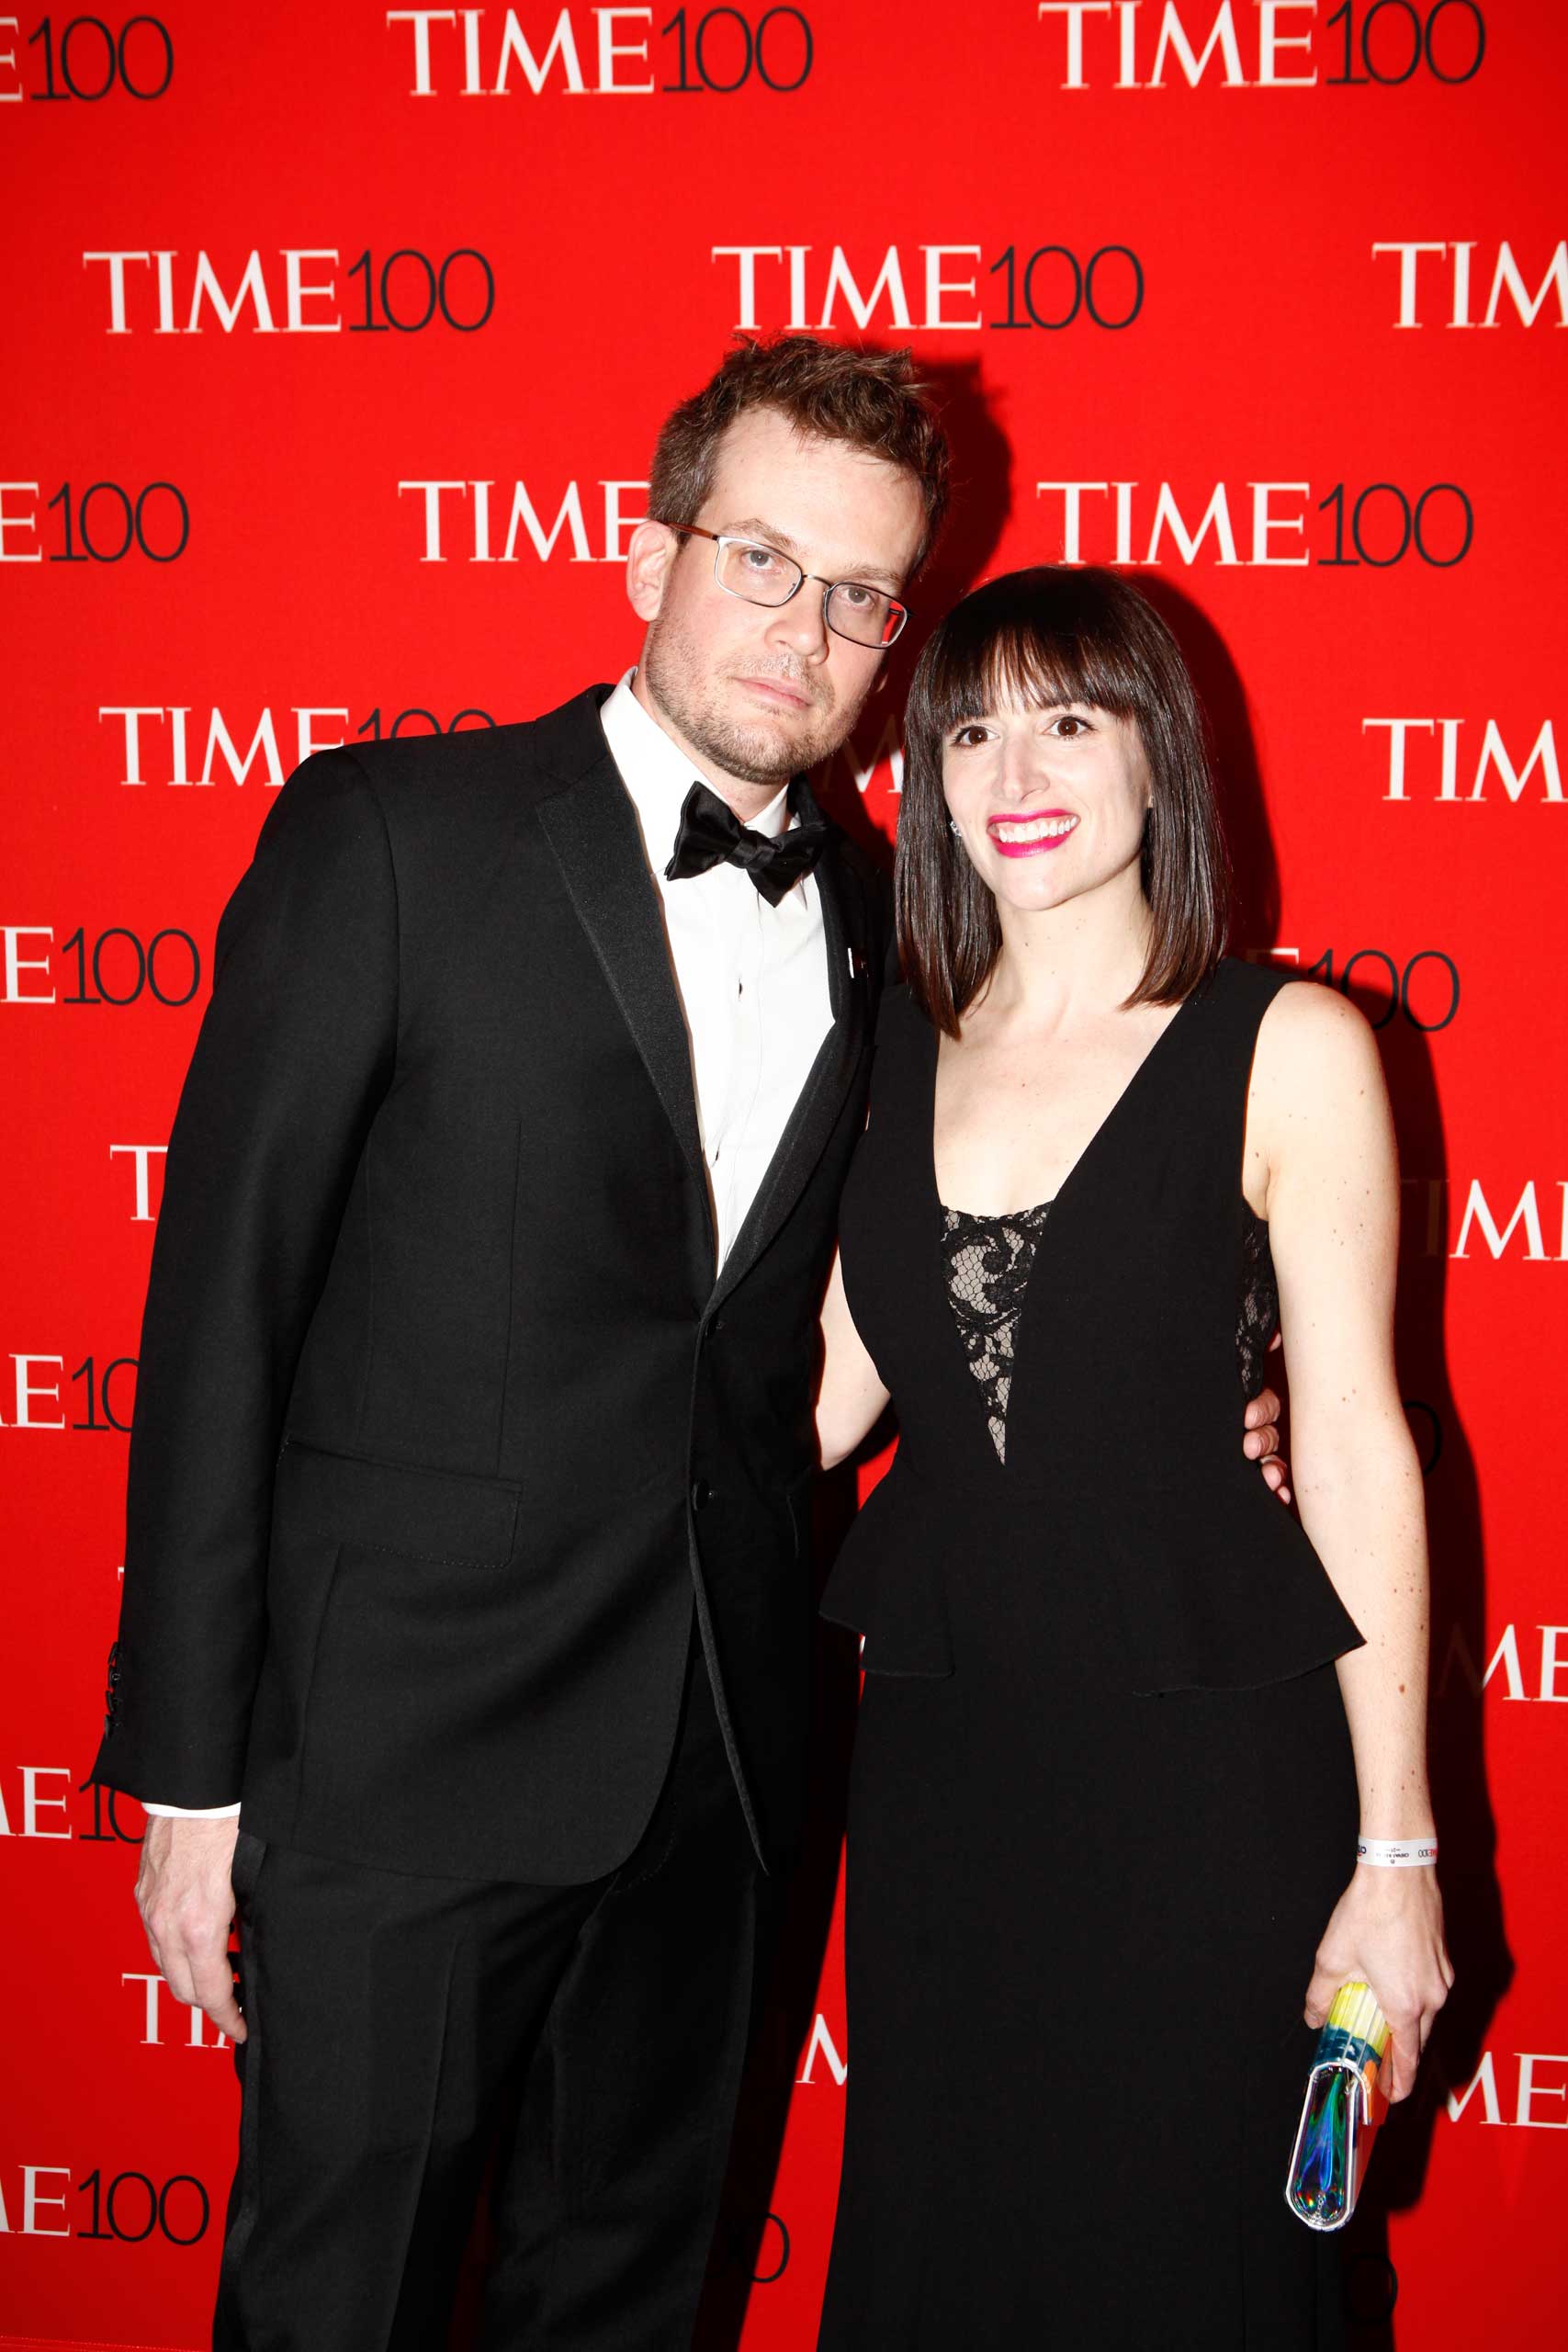 John Green and Sarah Urist Green attend the TIME 100 Gala at Lincoln Center in New York City on Apr. 21, 2015.